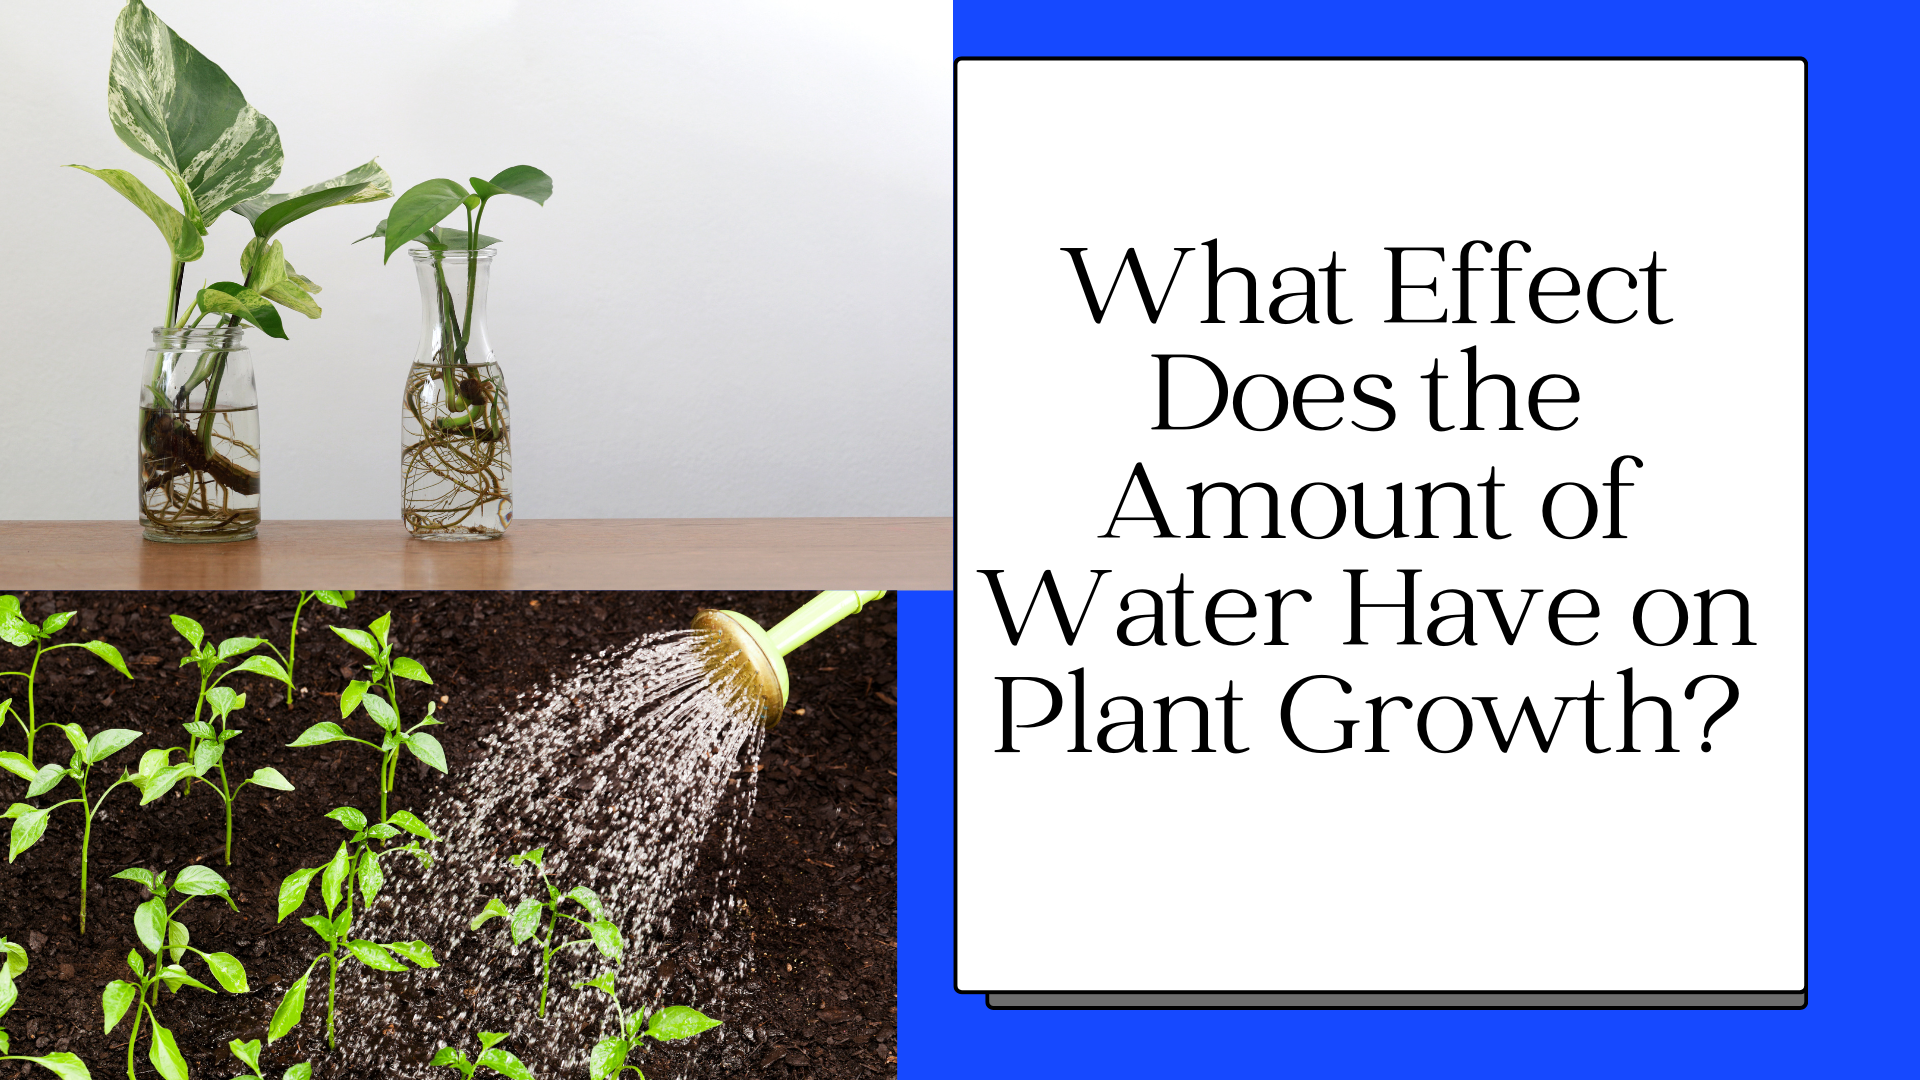 What Effect Does the Amount of Water Have on Plant Growth?